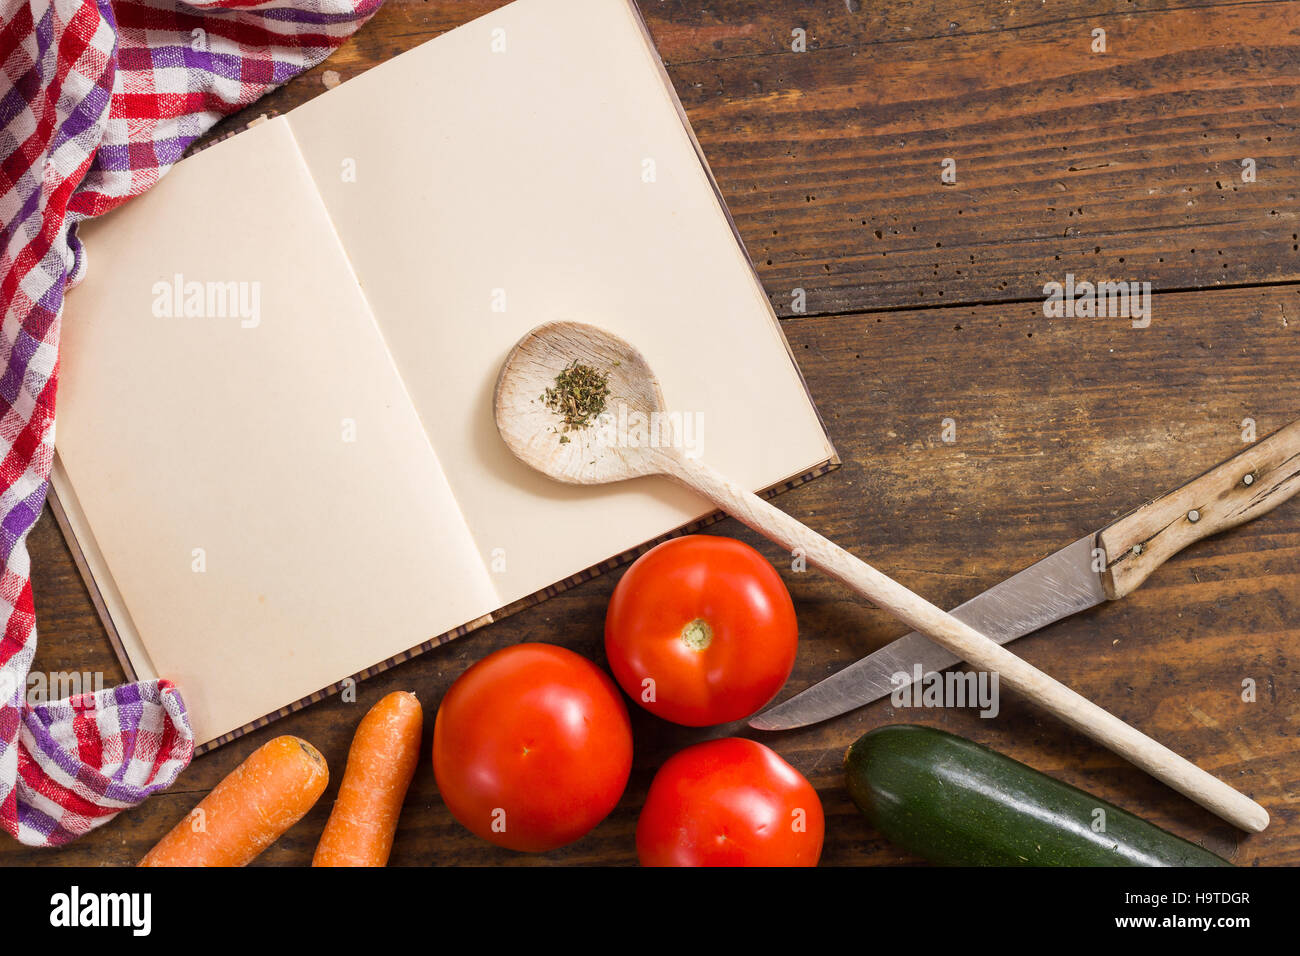 Opened cookbook and kitchen cloth, cooking utensils and vegetables as still life and top view background image with copy space Stock Photo